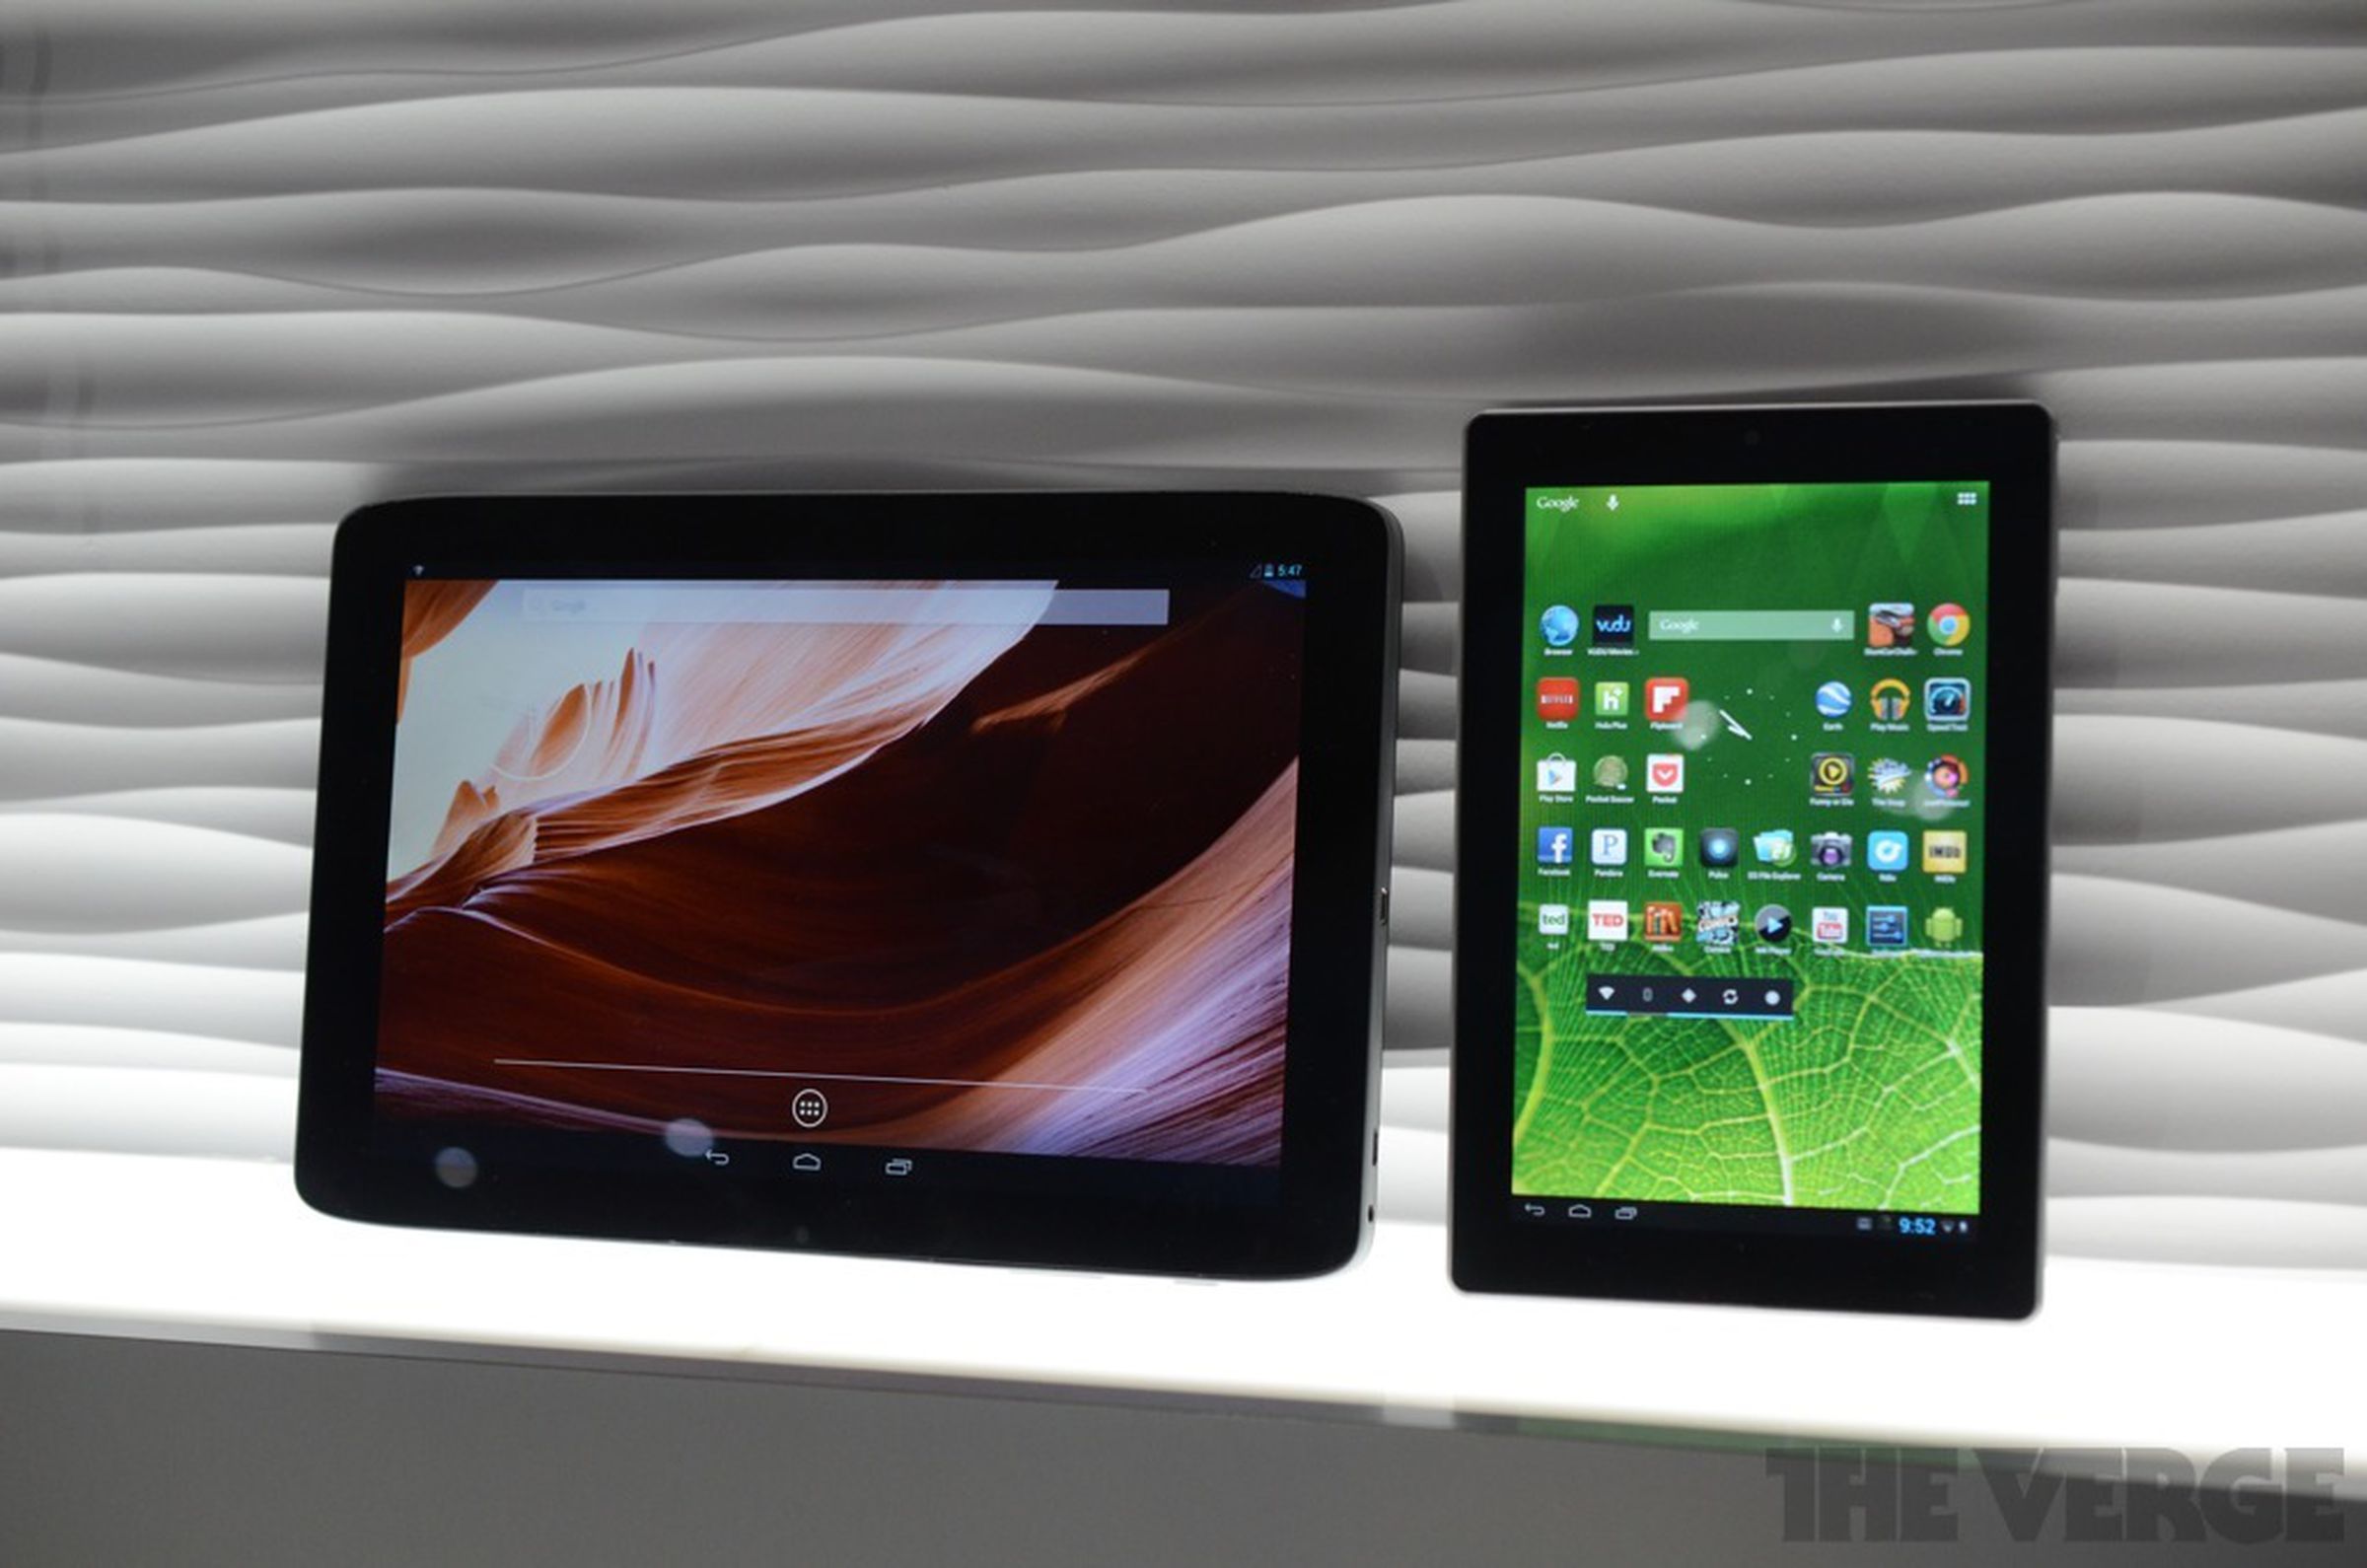 Vizio 10-inch Tablet hands-on pictures